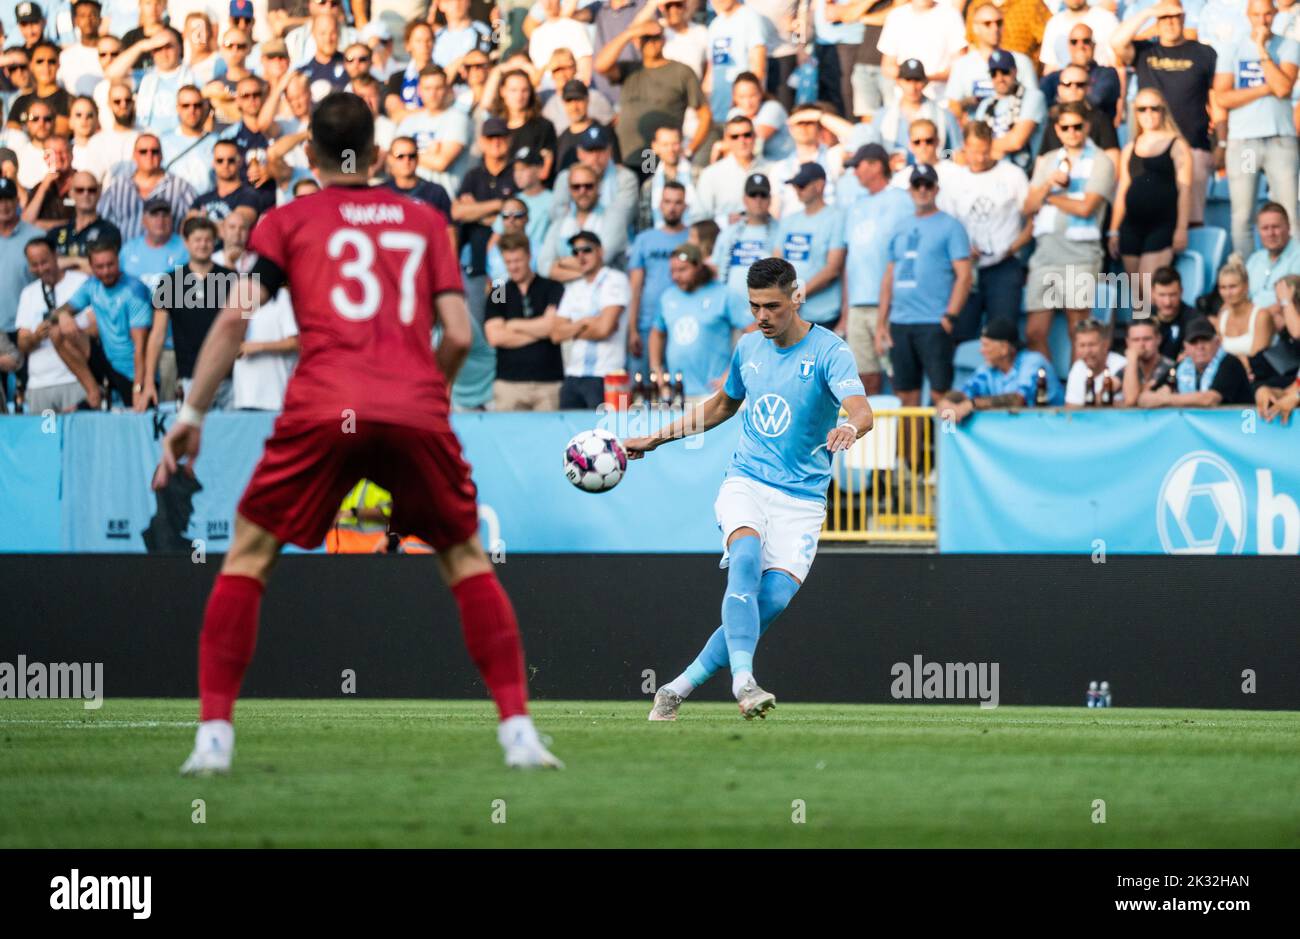 Malmoe, Sweden. 18th, August 2022. Dennis Hadzikadunic (21) of Malmö FF seen during the UEFA Europa League qualification match between Malmö FF and Sivasspor at Eleda Stadion in Malmö. (Photo credit: Gonzales Photo - Joe Miller). Stock Photo